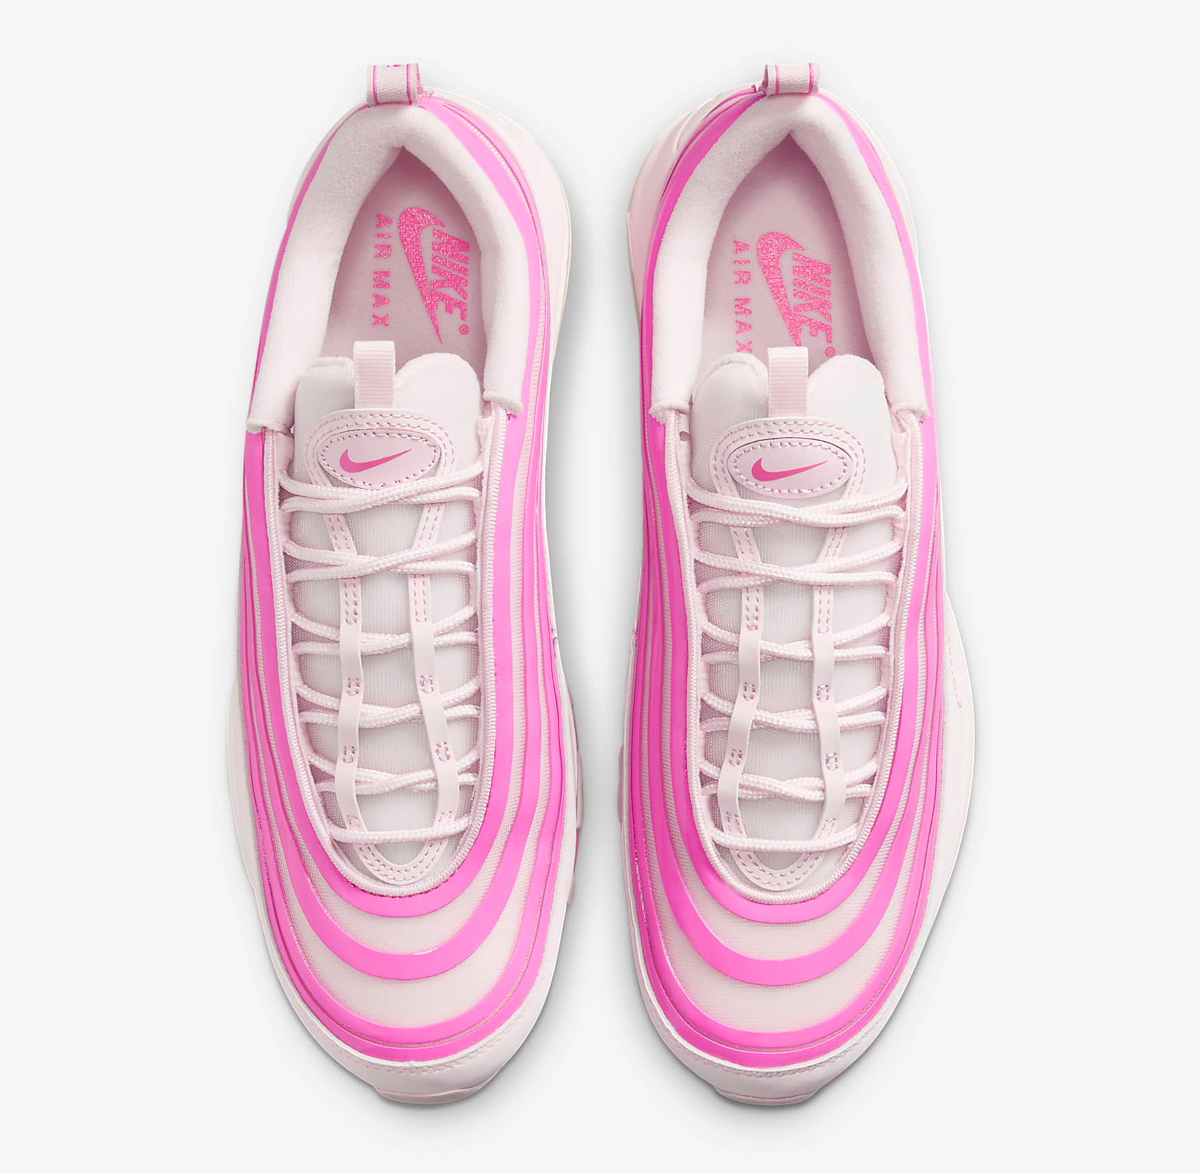 Nike-Air-Max-97-Pink-Foam-Playful-Pink-Release-Date-4